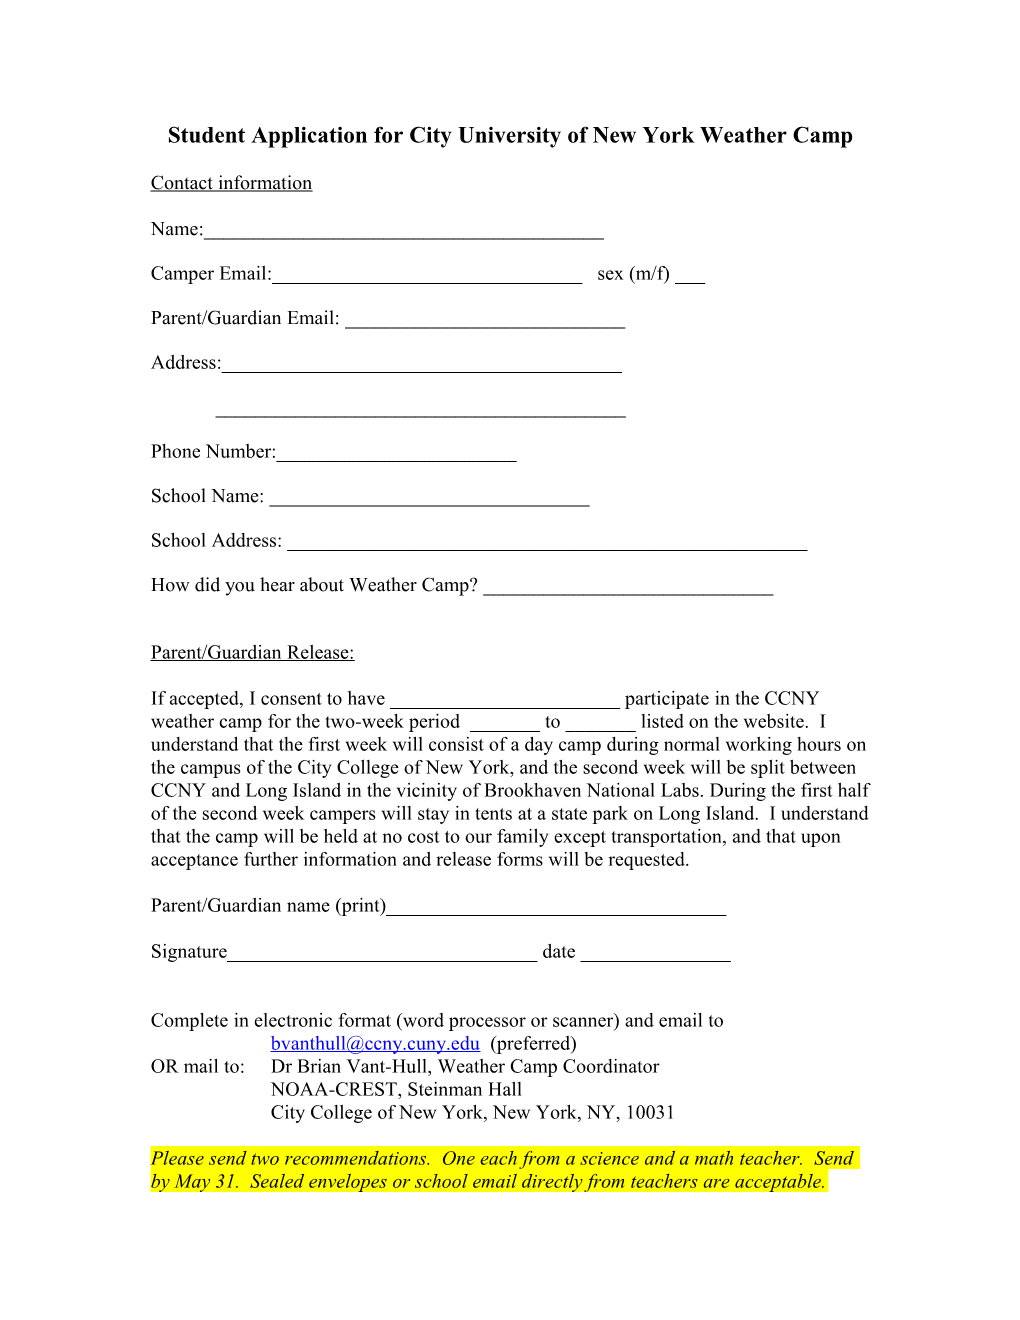 Student Application for City College of New York Weather Camp